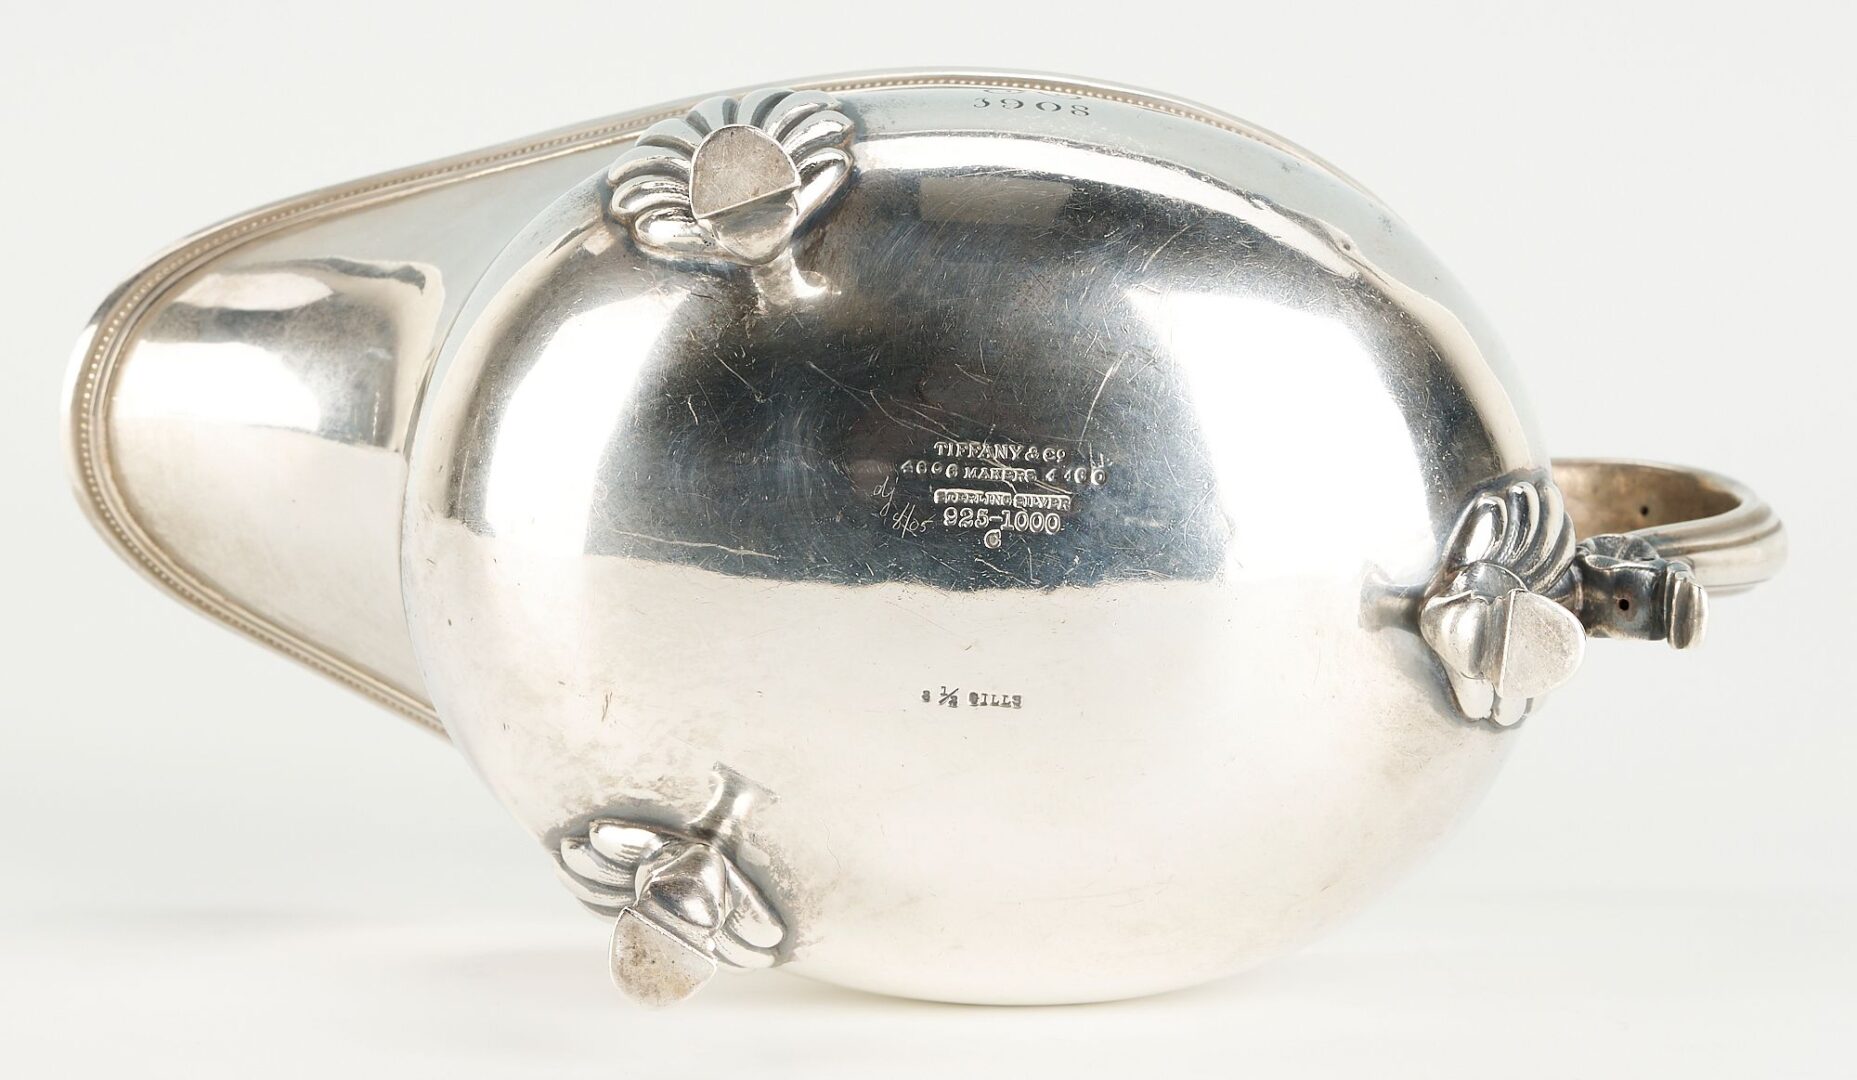 Lot 656: 3 pcs. Tiffany Silver incl. Sauceboat, Oyster Spoon & Sauce Ladle